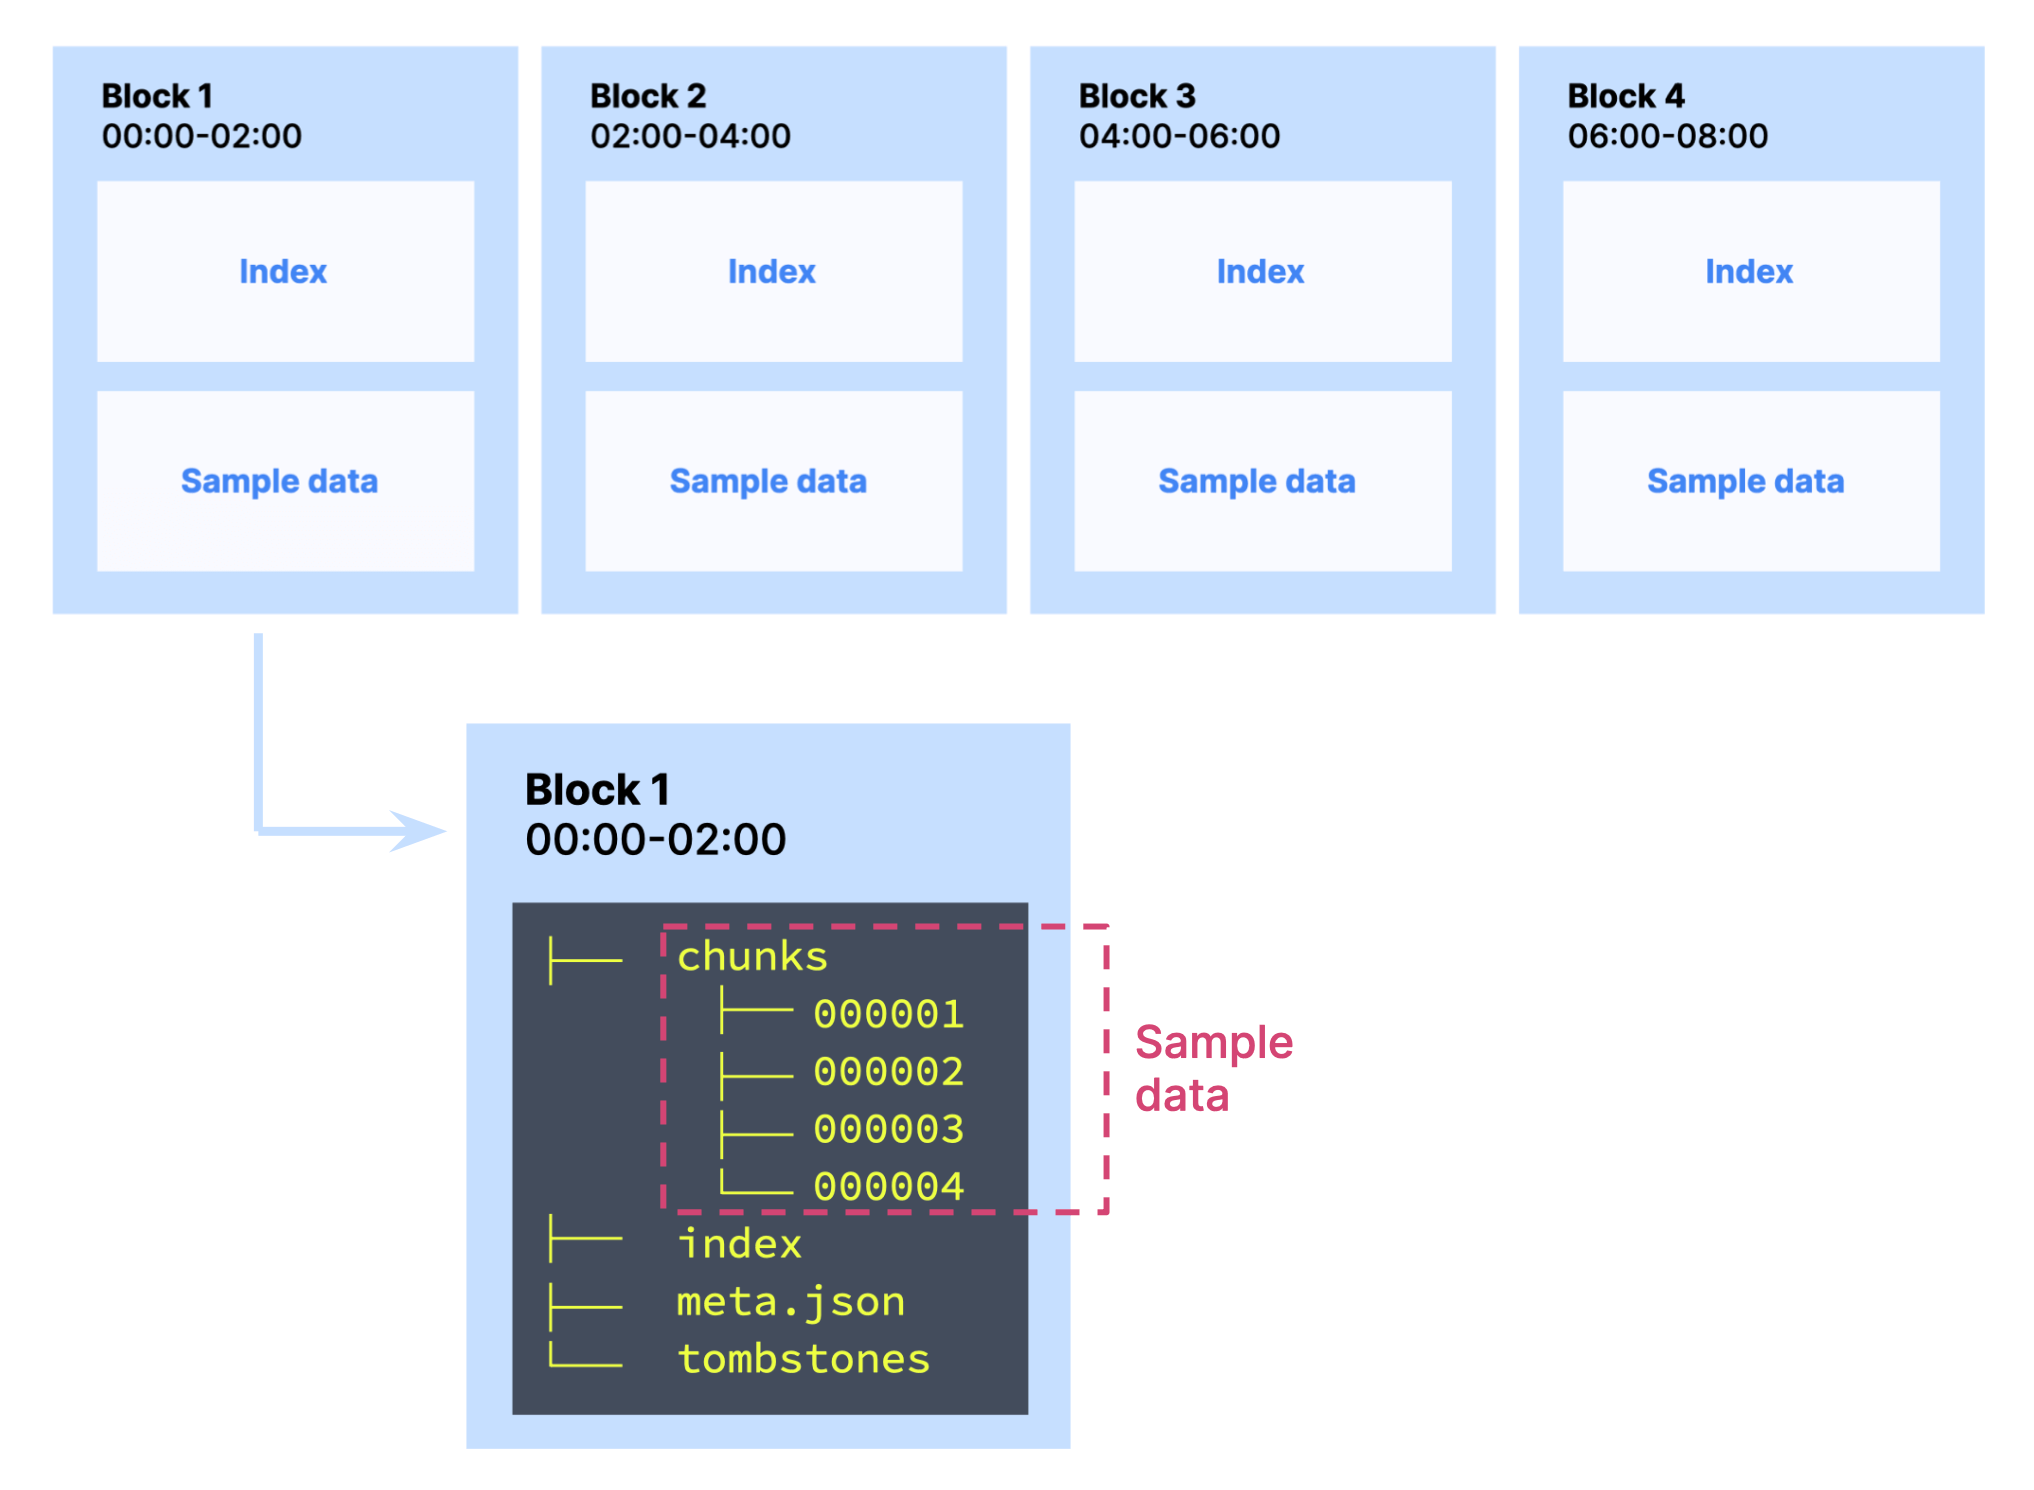 The Prometheus internal database uses basic units of storage called blocks—and within blocks, the sample data is further partitioned into chunks